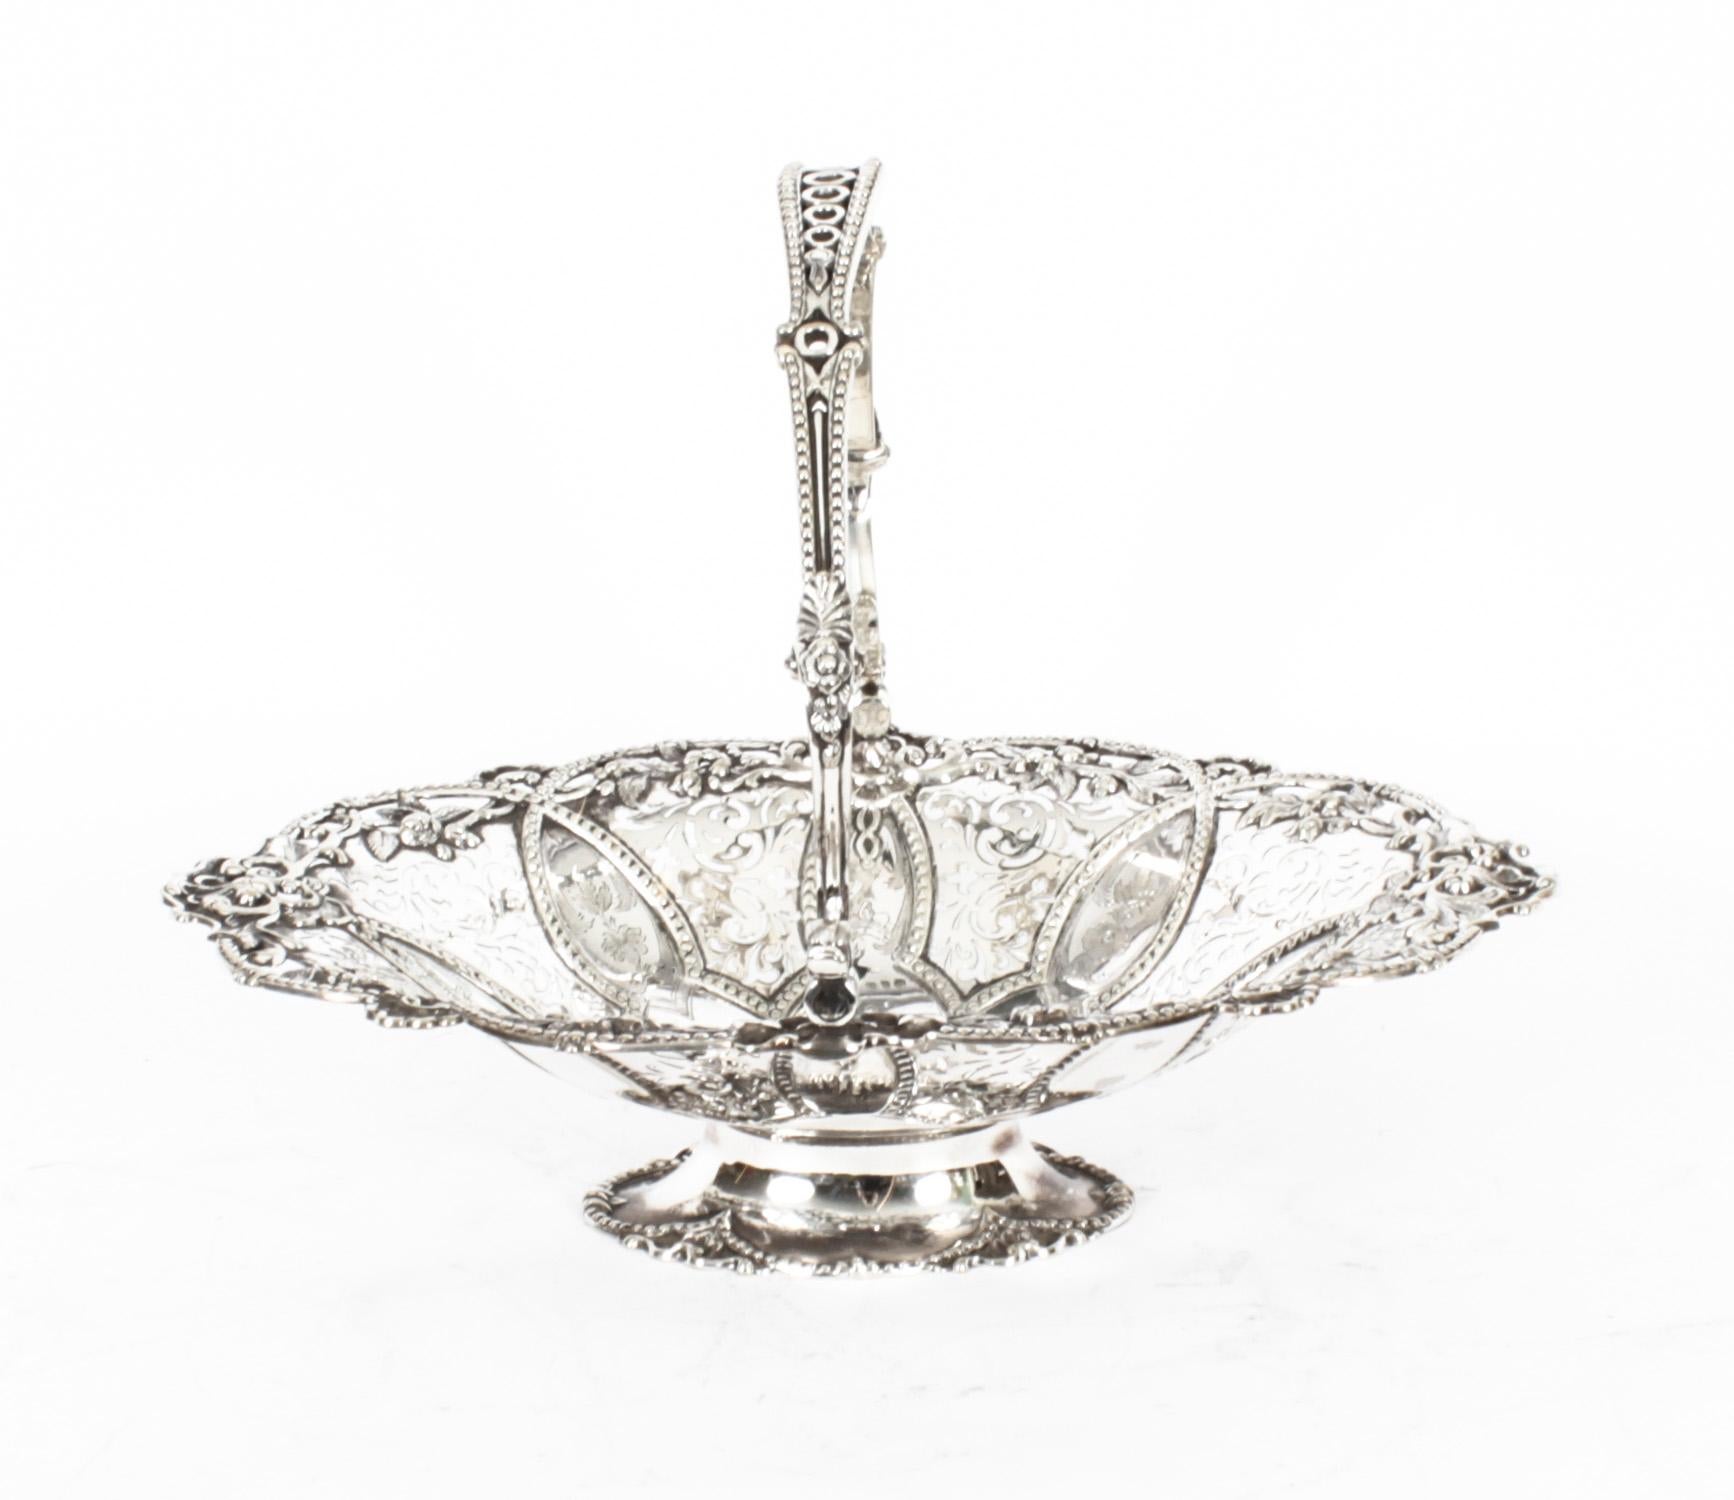 Mid-19th Century Antique Victorian Silver Plated Fruit Basket Martin Hall 19th Century For Sale